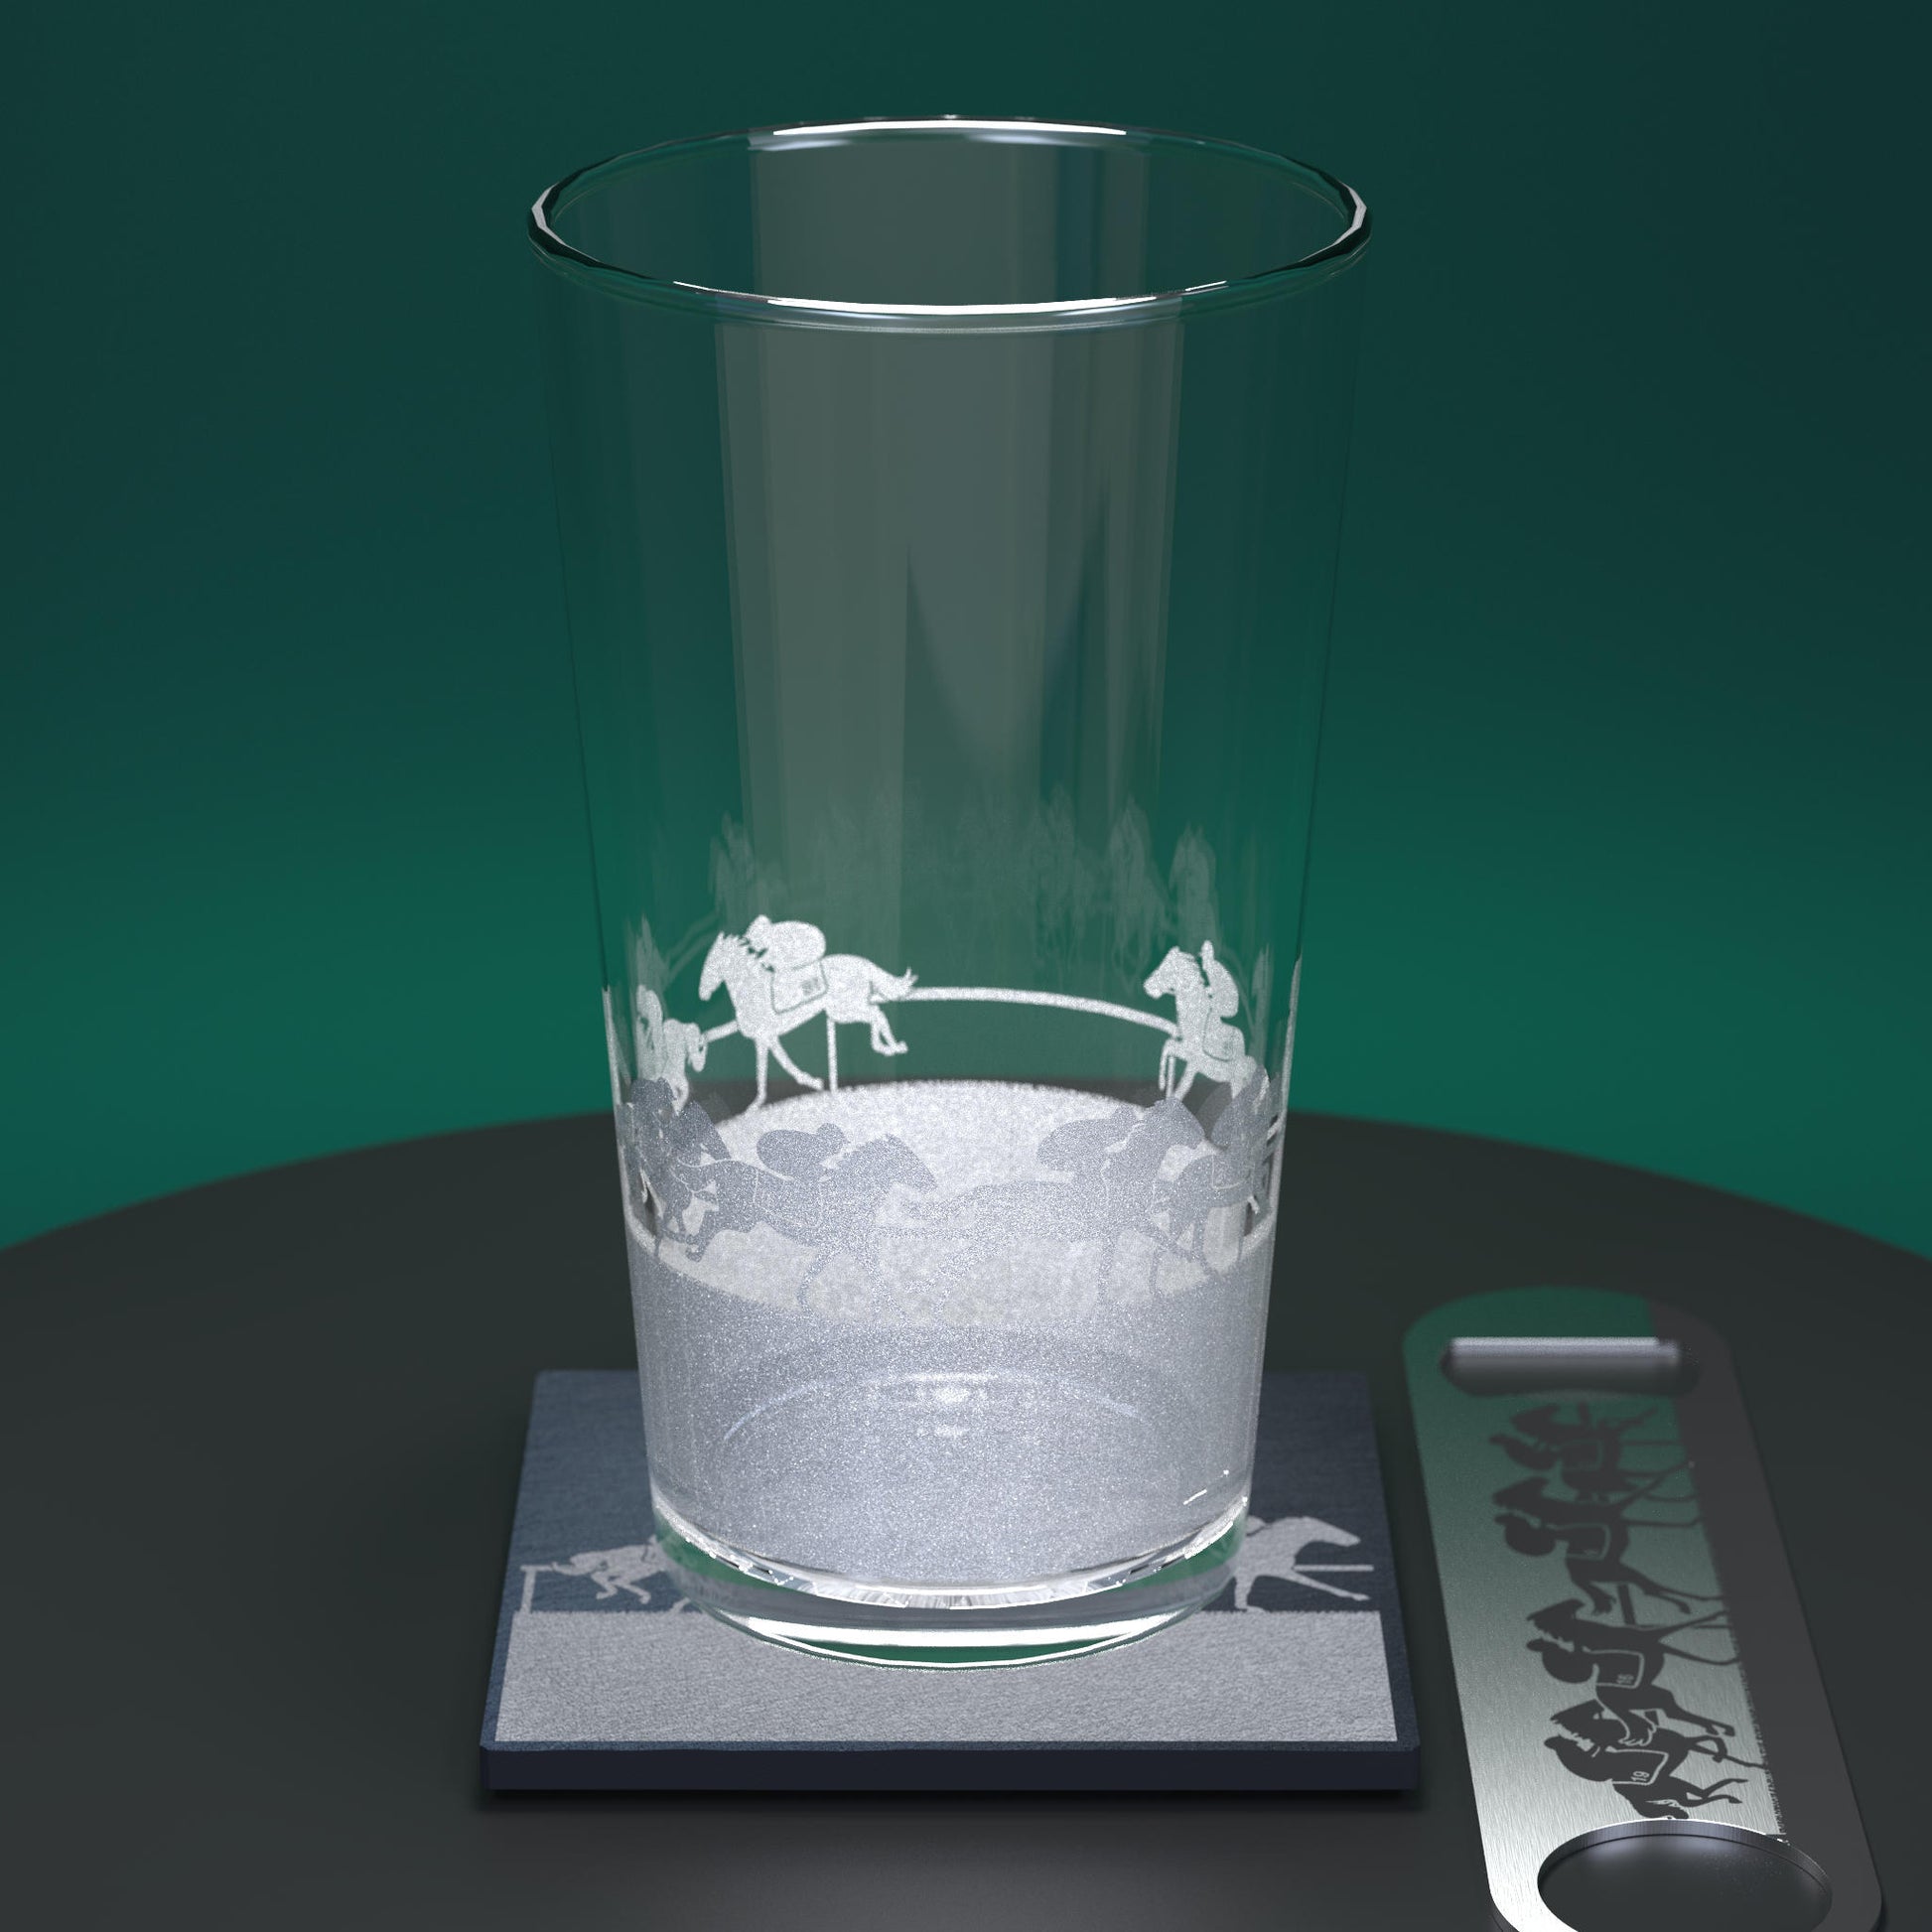 Pint glass set comprising glass, slate coaster and stainless steel bottle opener engraved with a horse racing scene